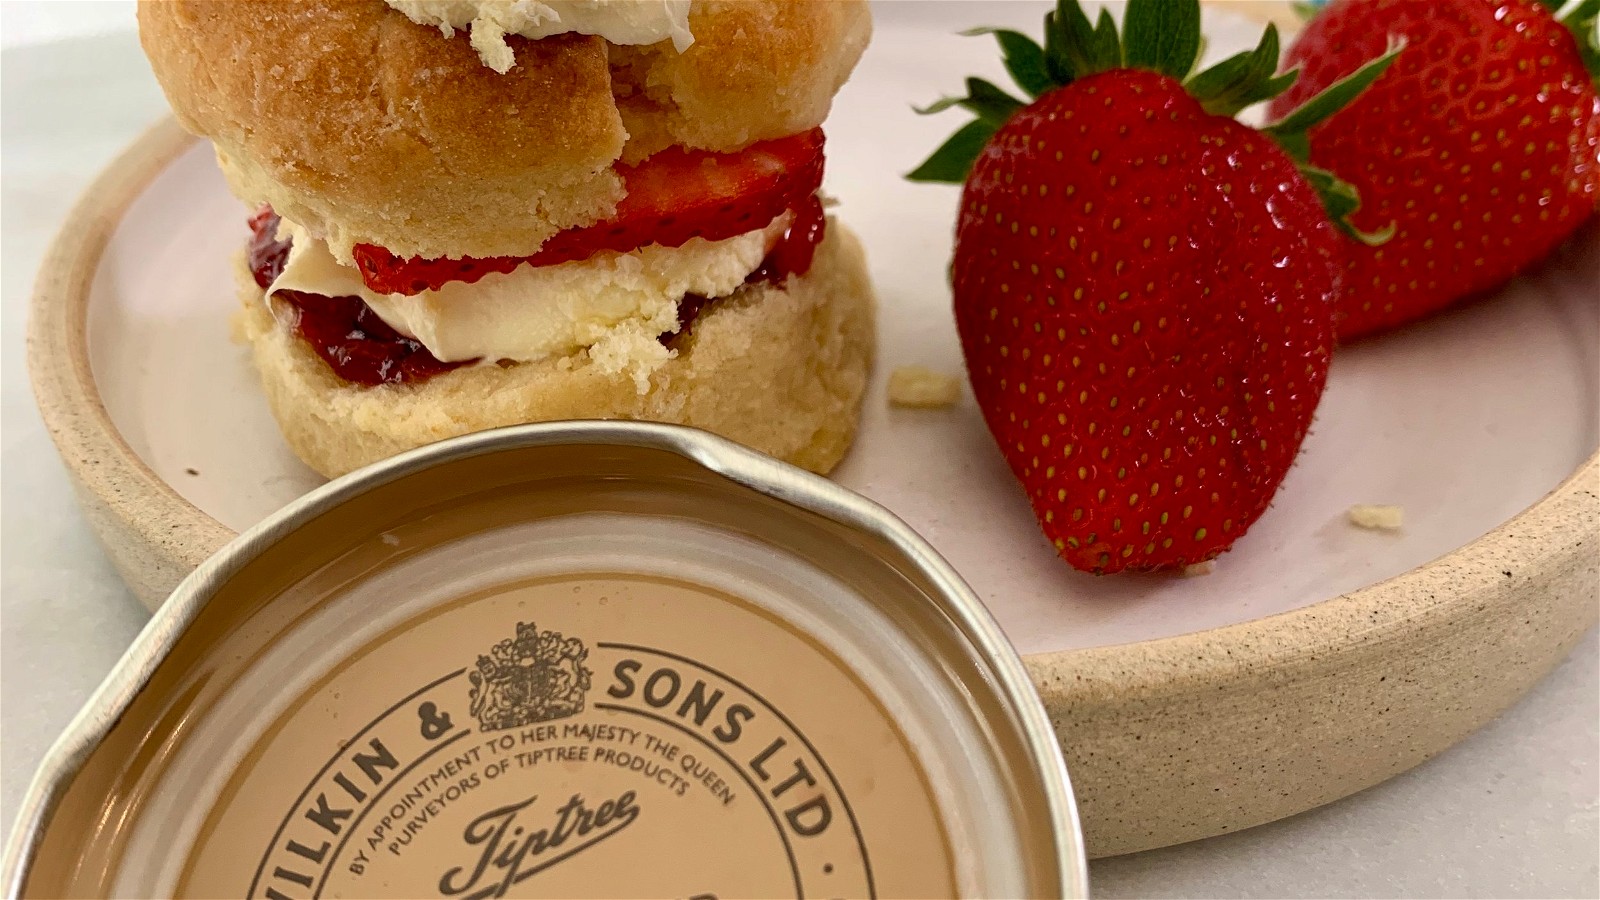 Image of Southern style strawberry shortcakes - James Hillery recipe